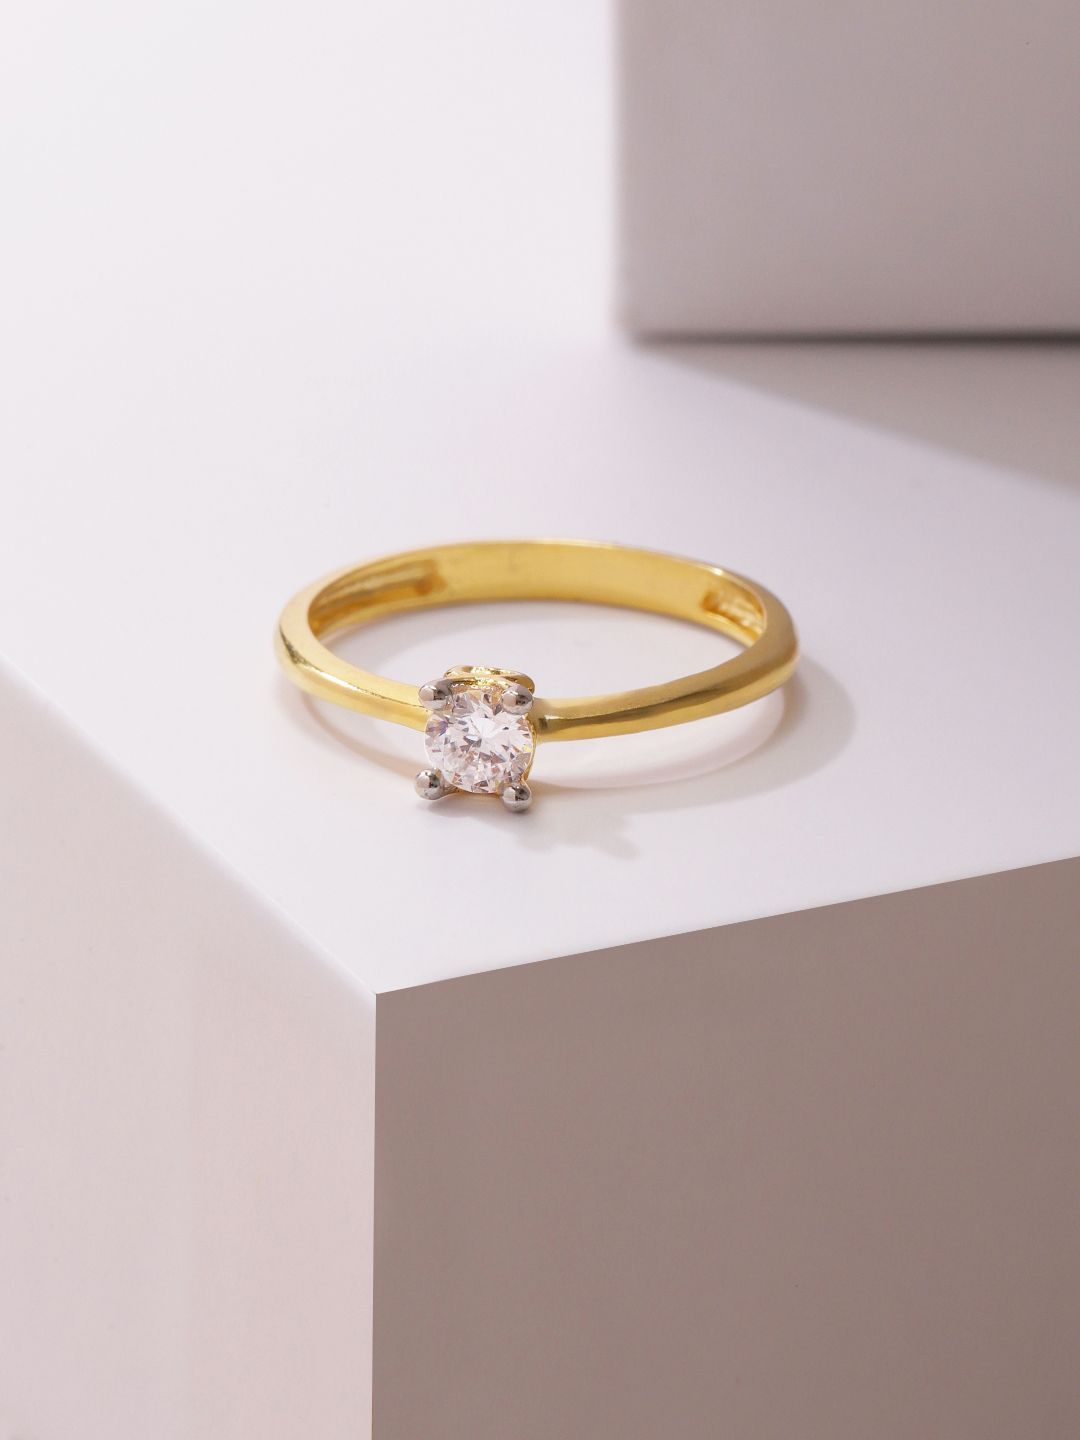 Light Weight Gold Ring Design - JD SOLITAIRE